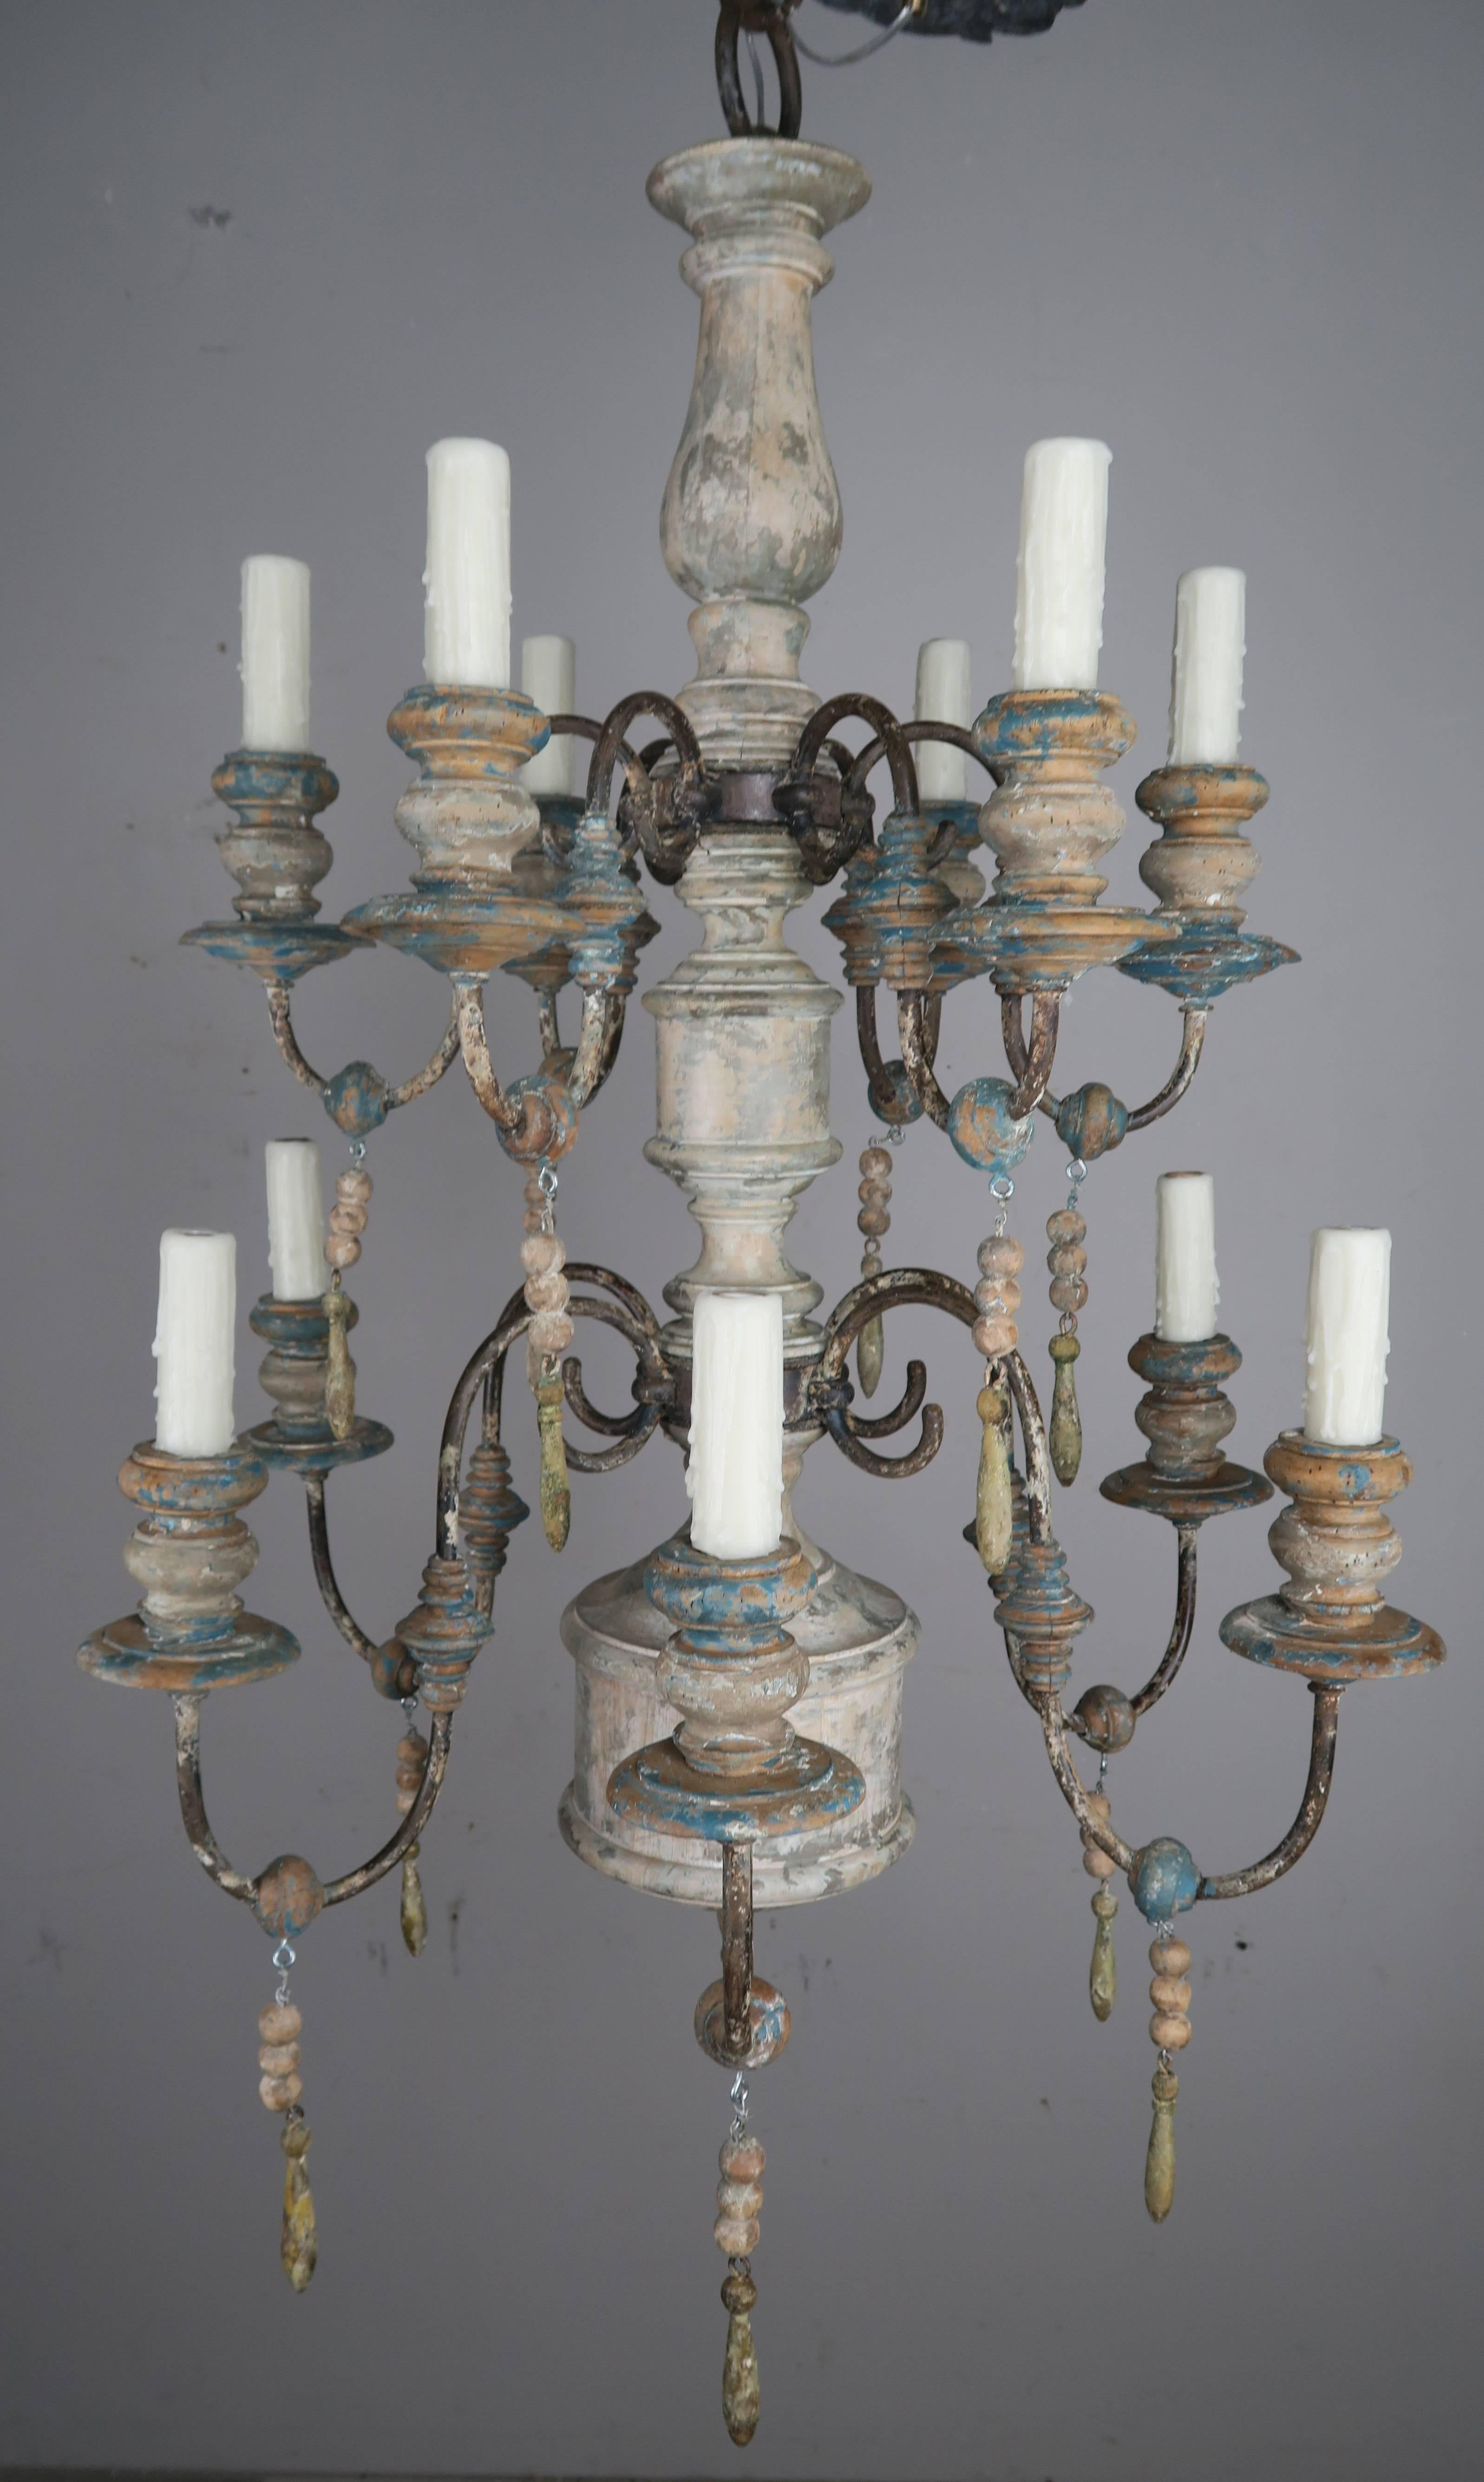 Rustic Pair of Twelve-Light Wood and Iron Painted Chandeliers